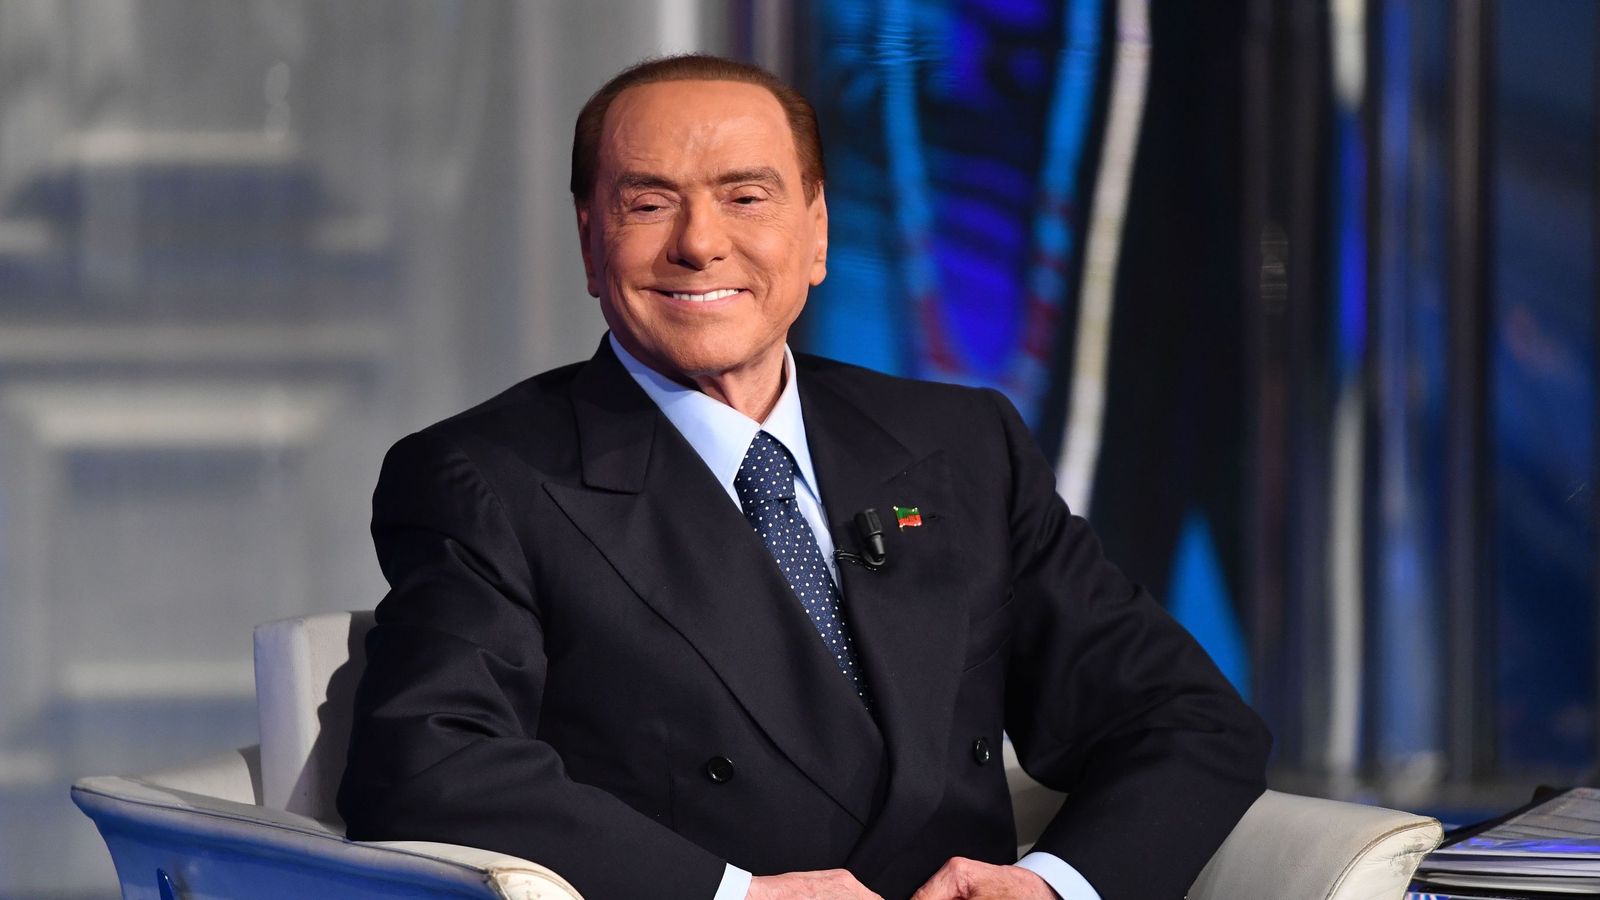 Silvio Berlusconi Faces New Trial Over Accusations He Paid